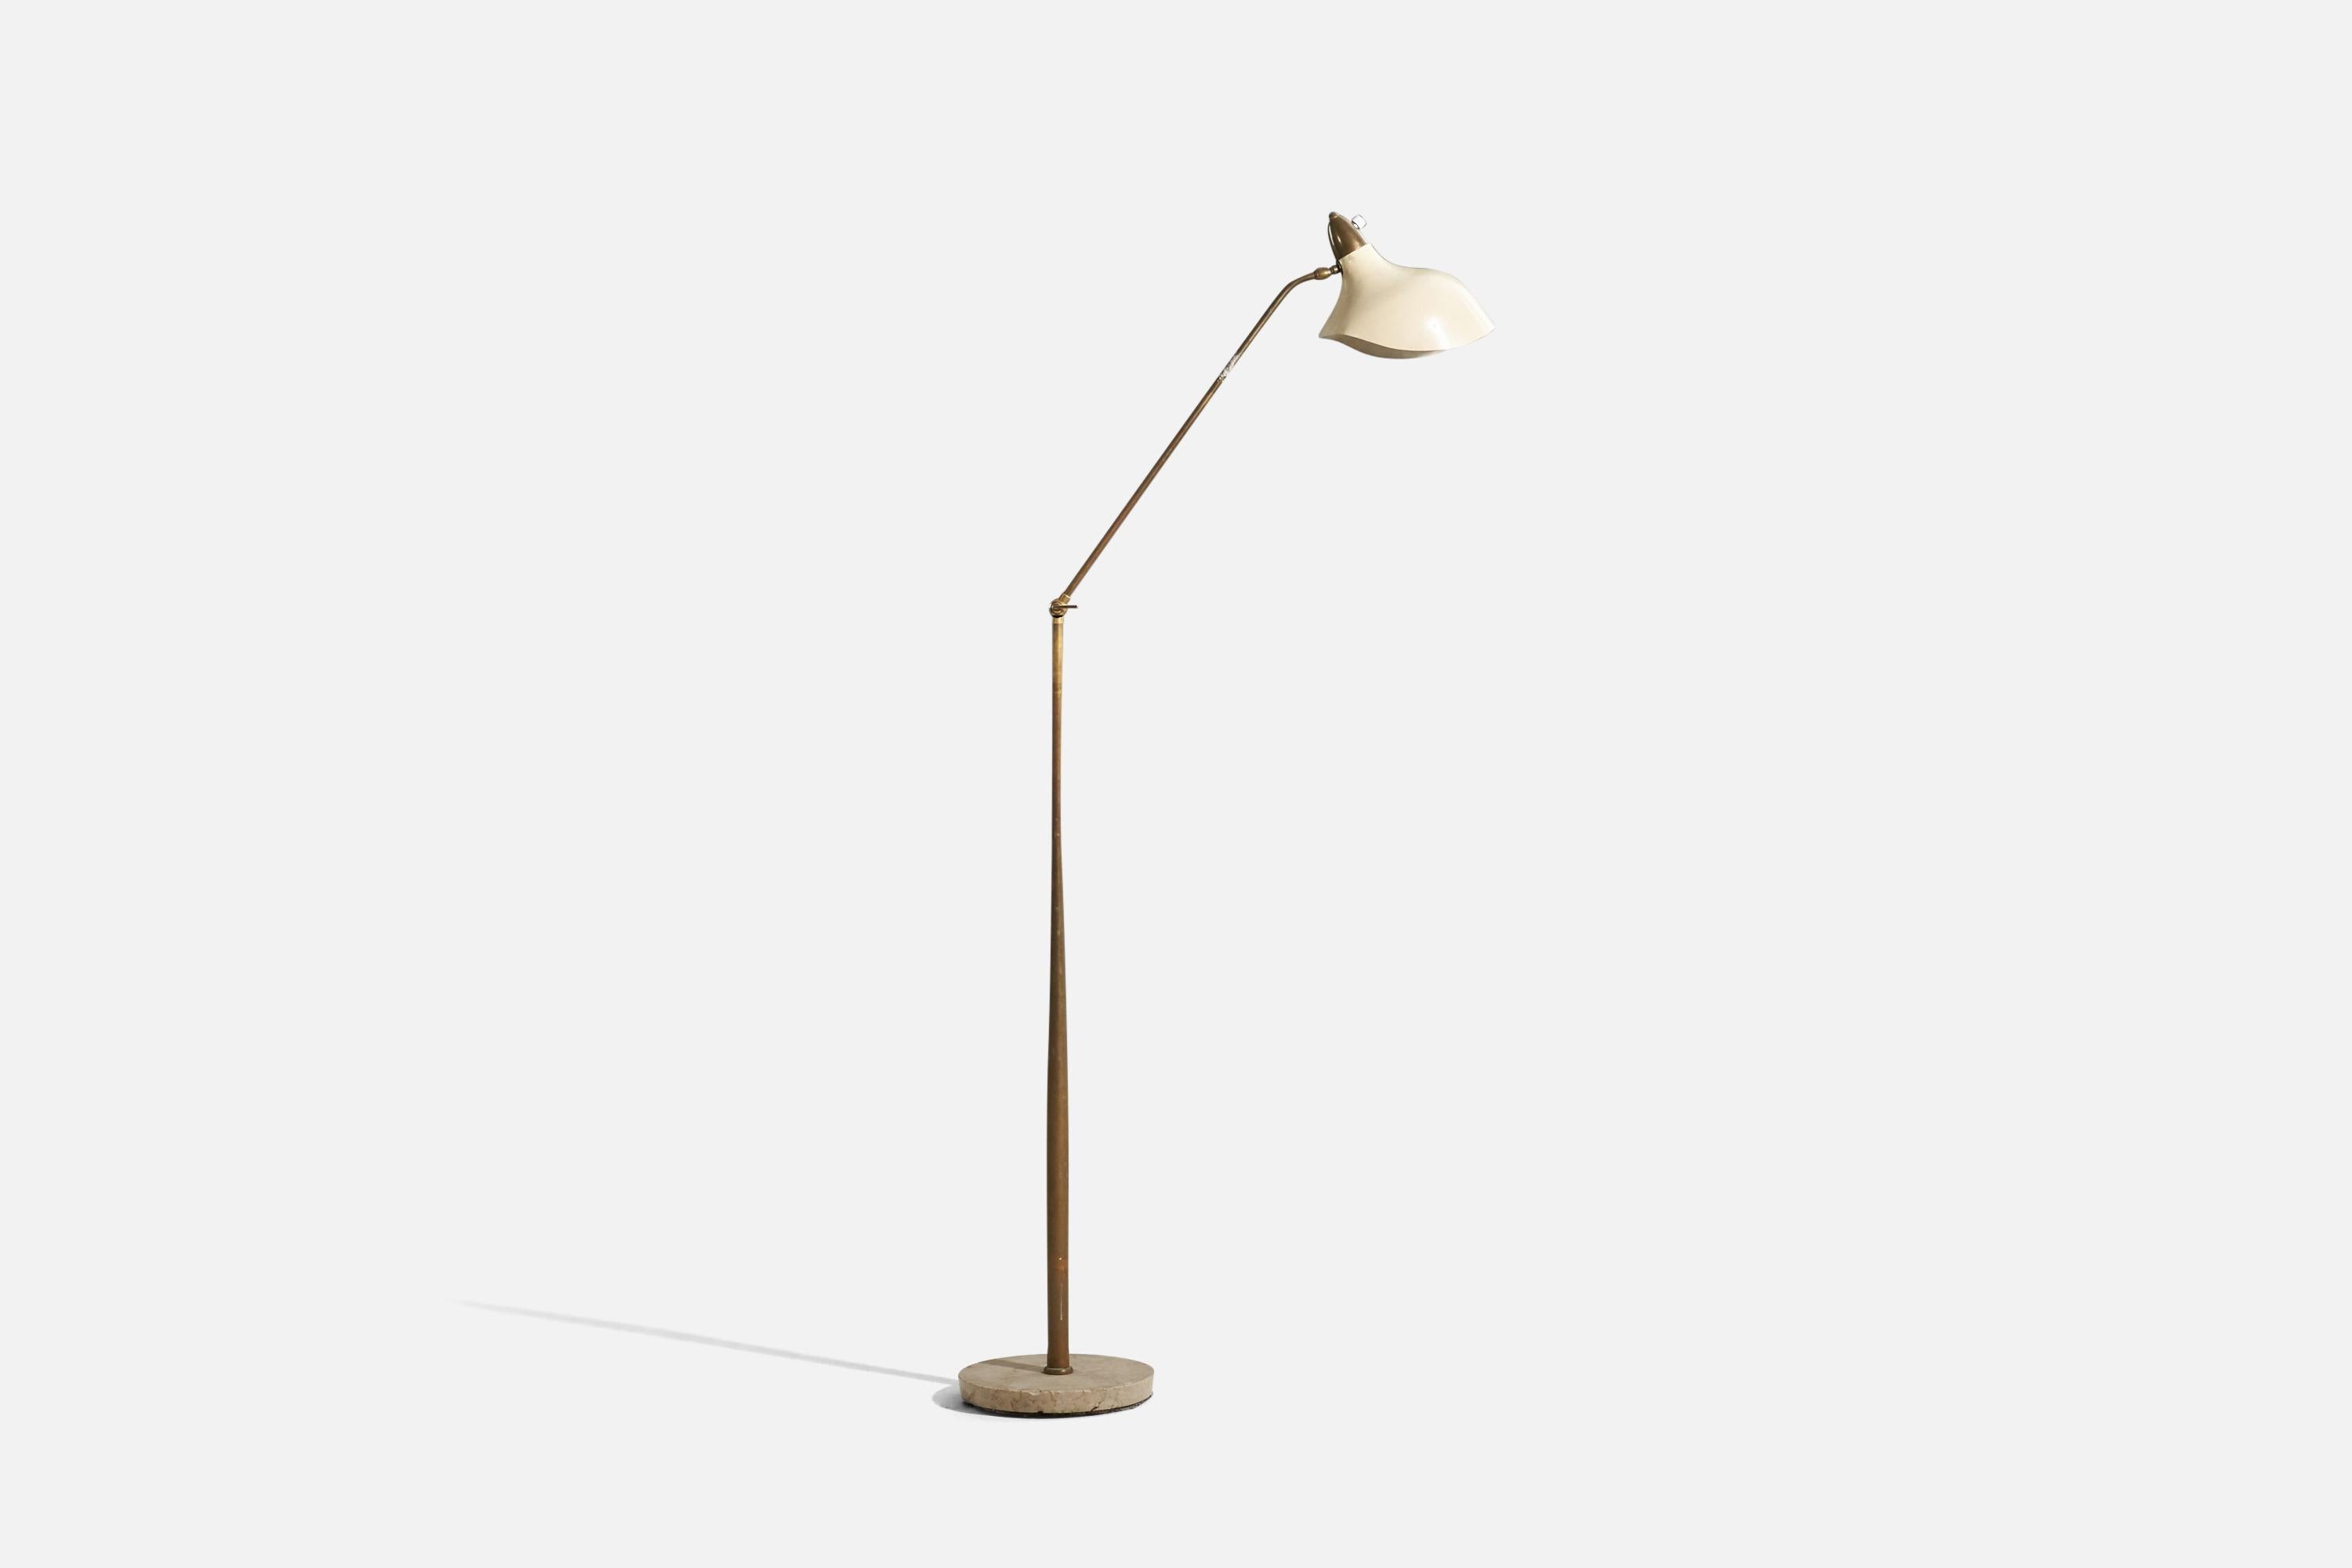 A brass, marble and metal floor lamp designed and produced in Italy, c. 1950s.

Variable dimensions, measured as illustrated in the first image.

Socket takes standard E-26 medium base bulb.
There is no maximum wattage stated on the fixture.